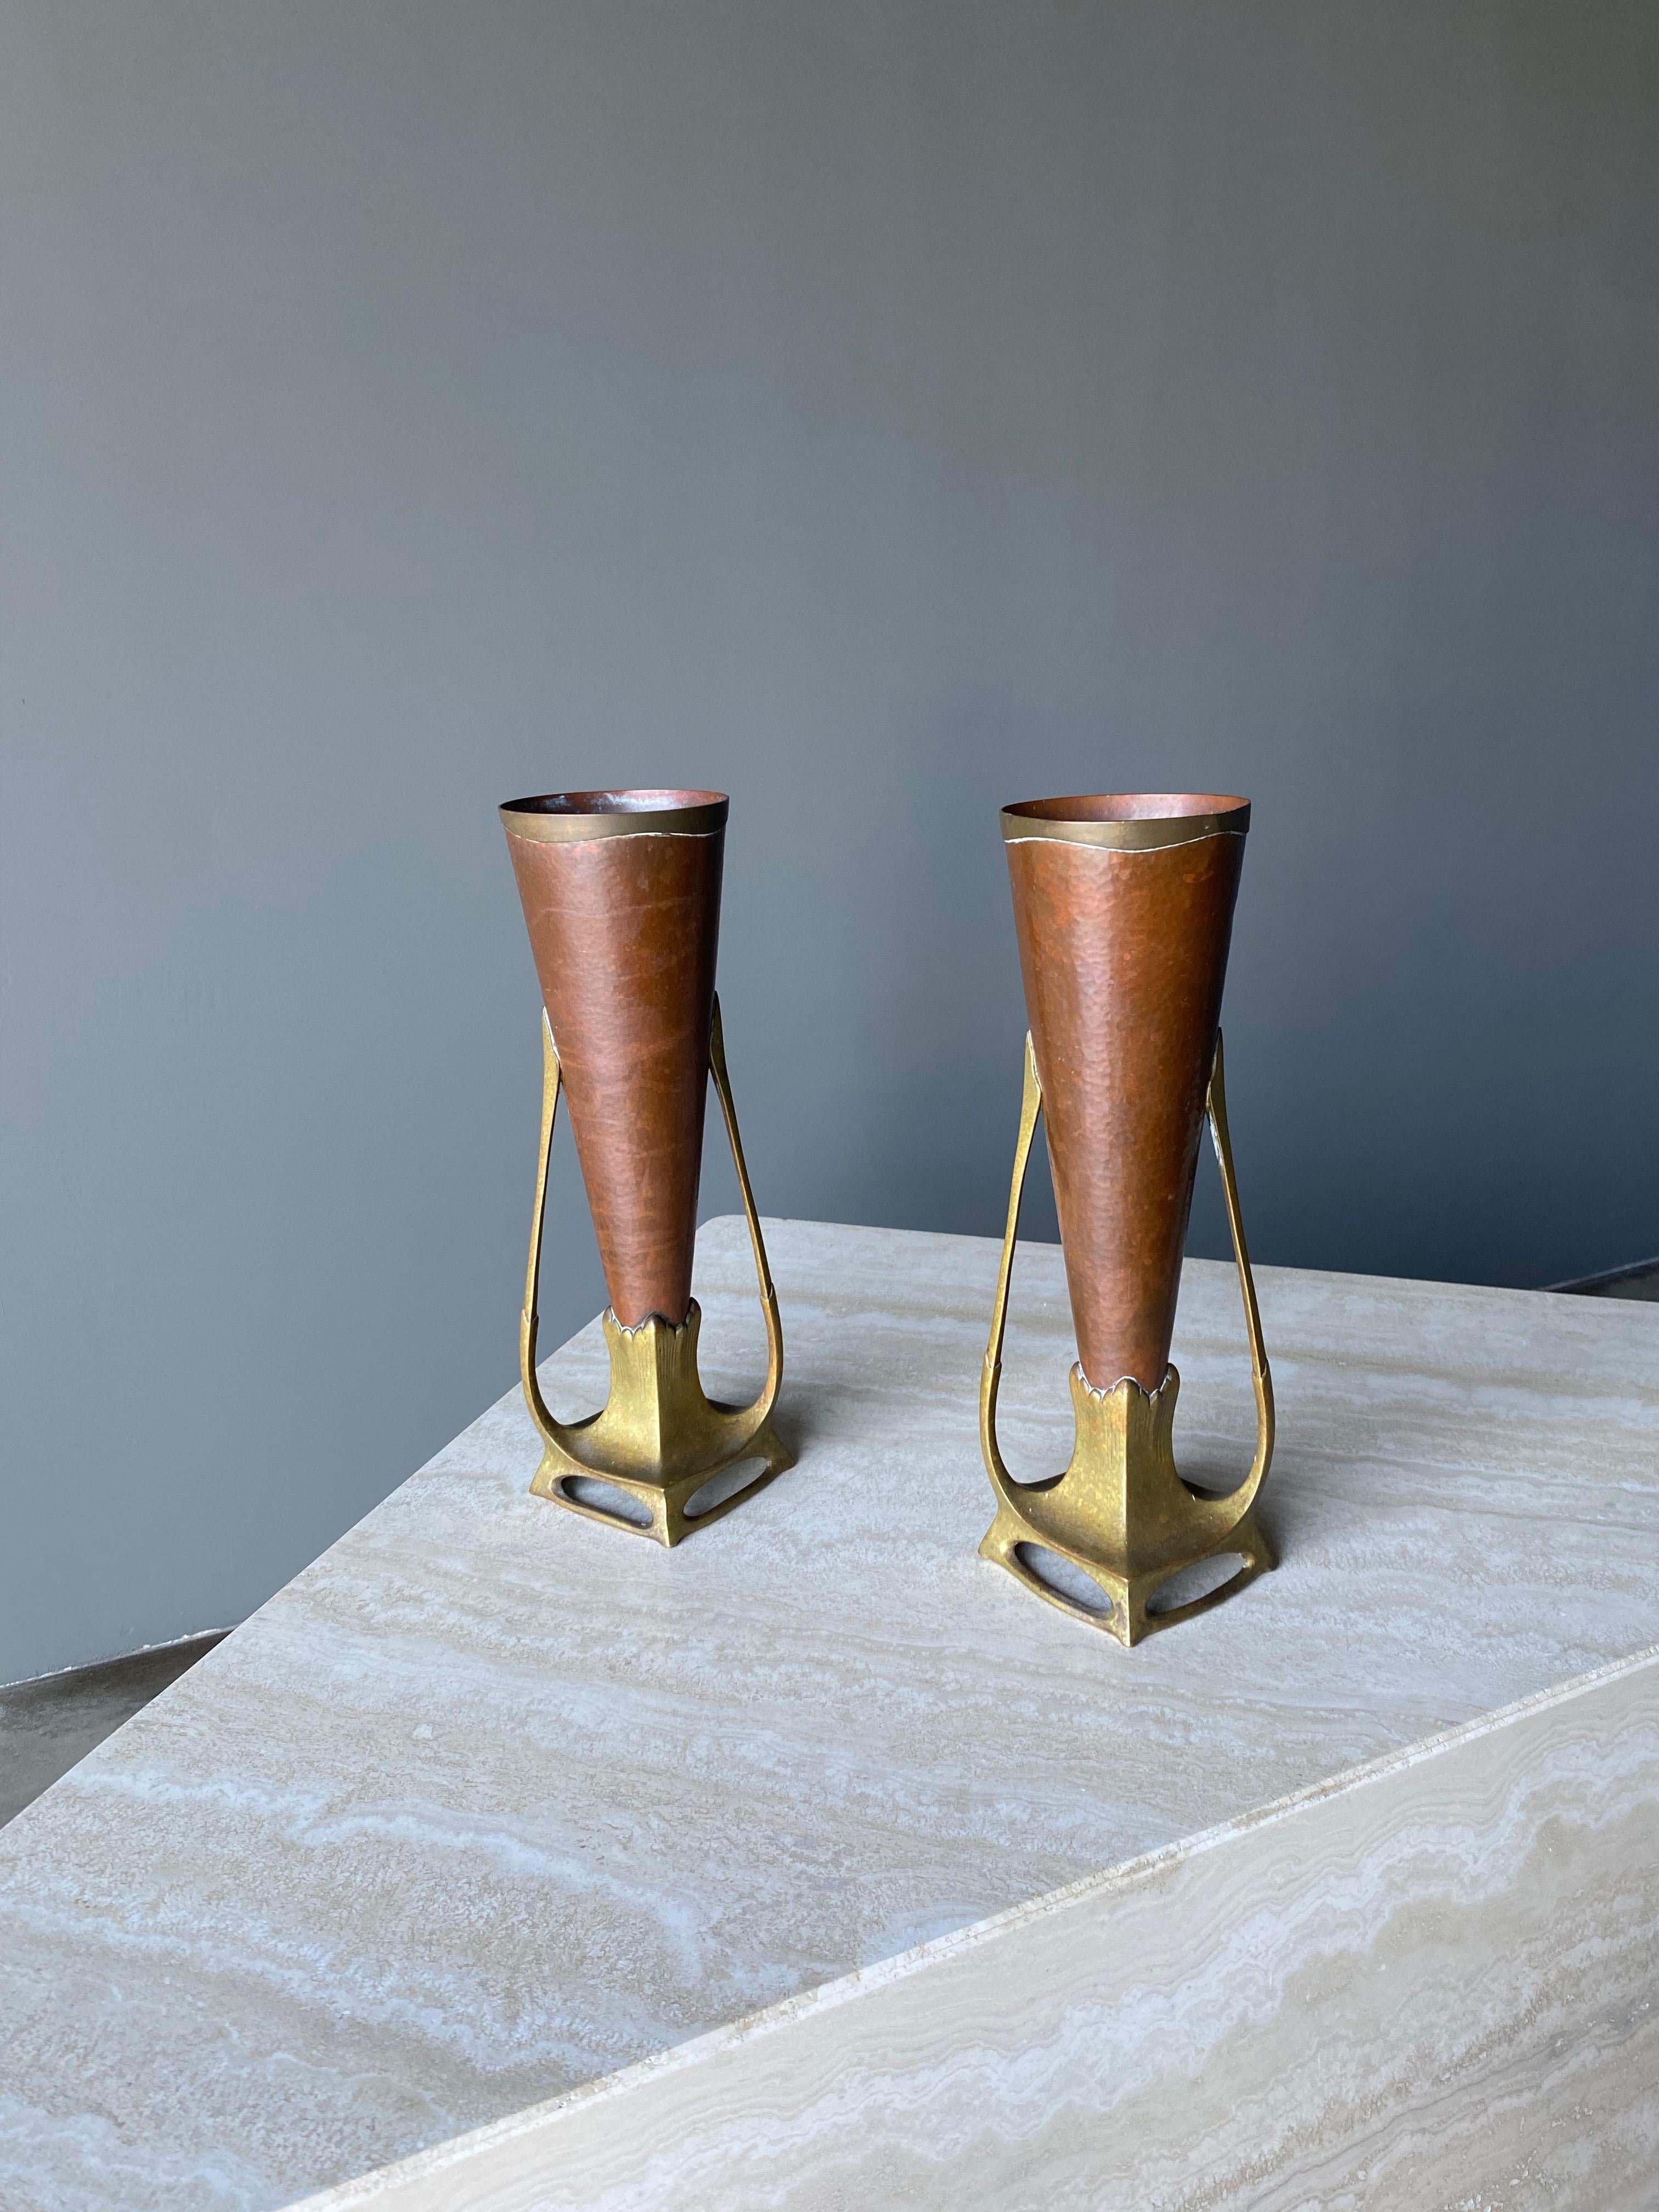 Carl Deffner Pair of Hammered Copper & Cast Bronze Vases, Germany, circa 1900 For Sale 5